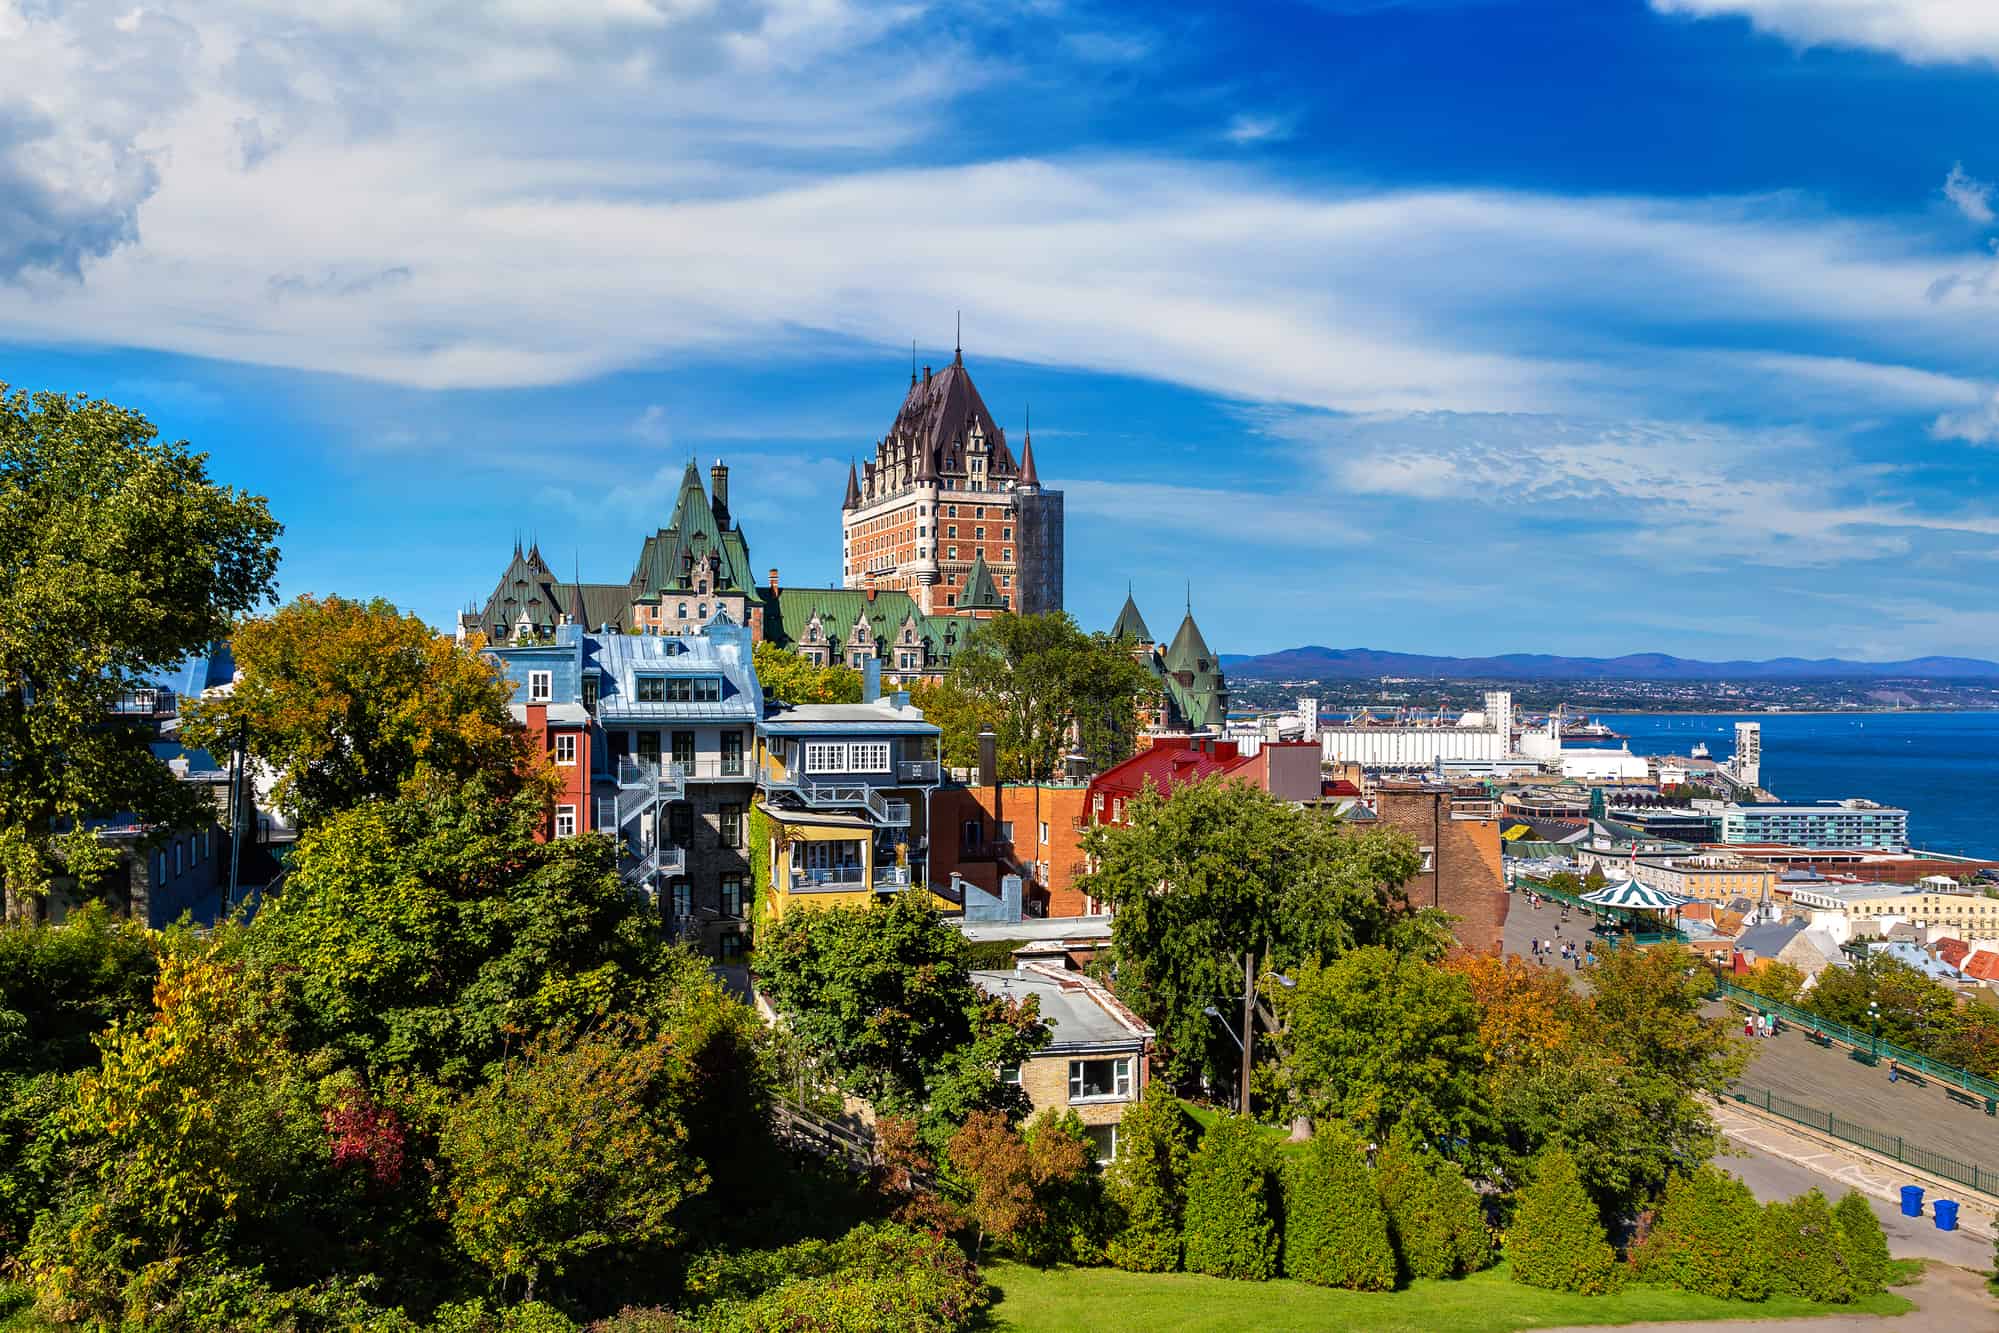 <p>Québec City boasts a thriving culinary scene, with its restaurants serving up a delectable array of French and Canadian-inspired dishes. From classic French cuisine to hearty Québécois comfort food, Québec City’s best restaurants are sure to satisfy every palate.<br><strong>Read more: </strong><a href="https://fooddrinklife.com/the-best-quebec-city-restaurants/?utm_source=msn&utm_medium=page&utm_campaign=msn">The Best Québec City Restaurants To Discover Canada’s Historical Gem</a></p>